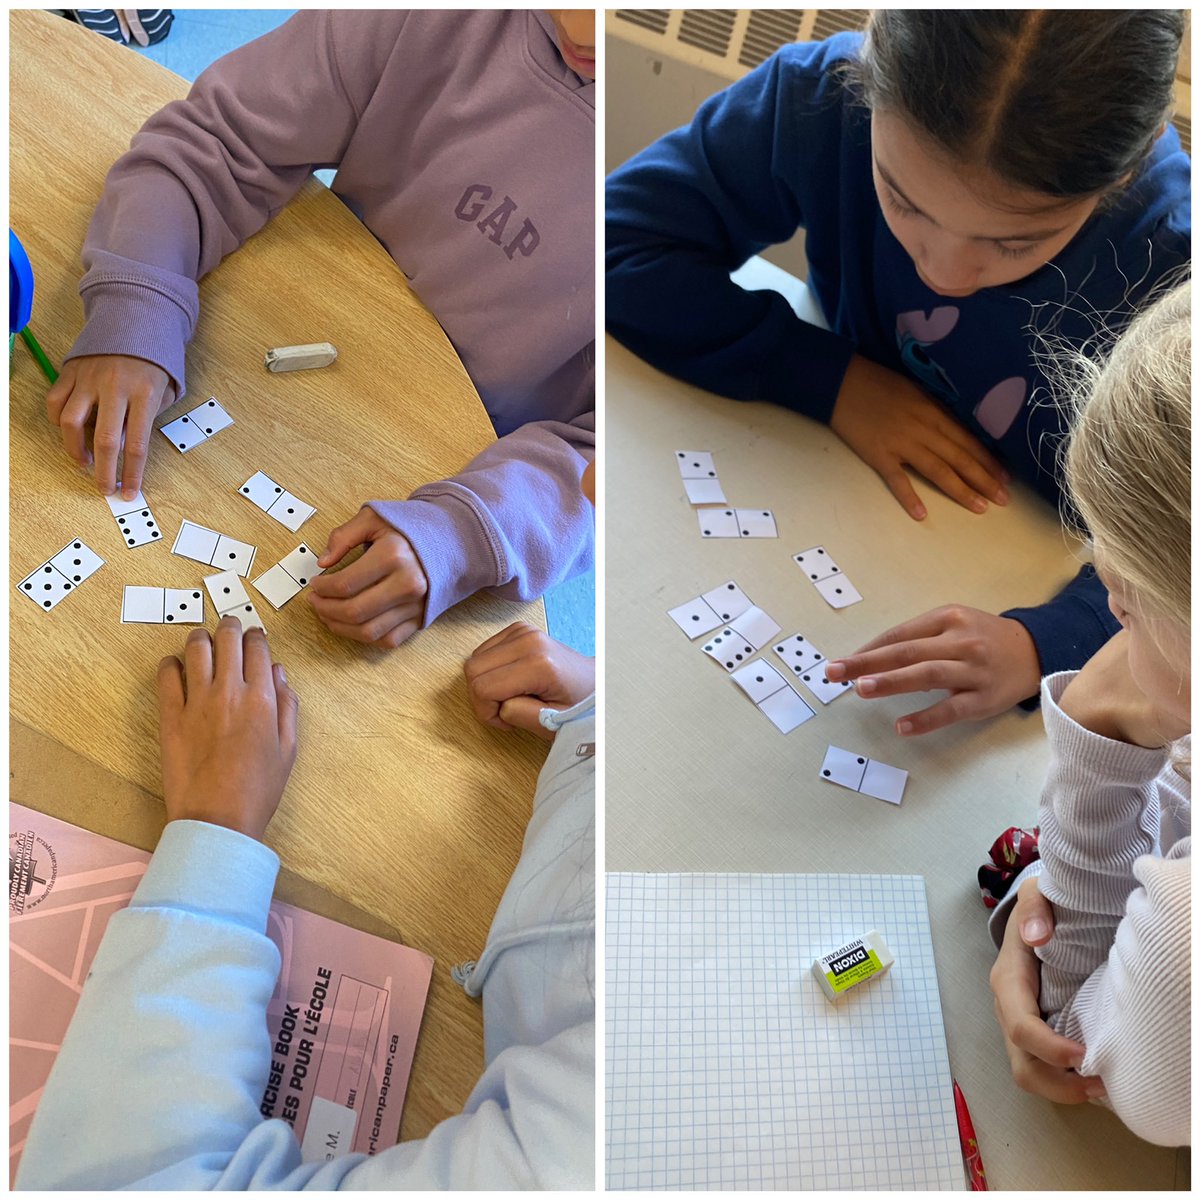 Working on math challenges from @nrichmaths this week! Ss tried to make rows and columns of dominoes that each equaled 8. We are working on making mistakes in learning and enjoying successes when we finally work out a solution!